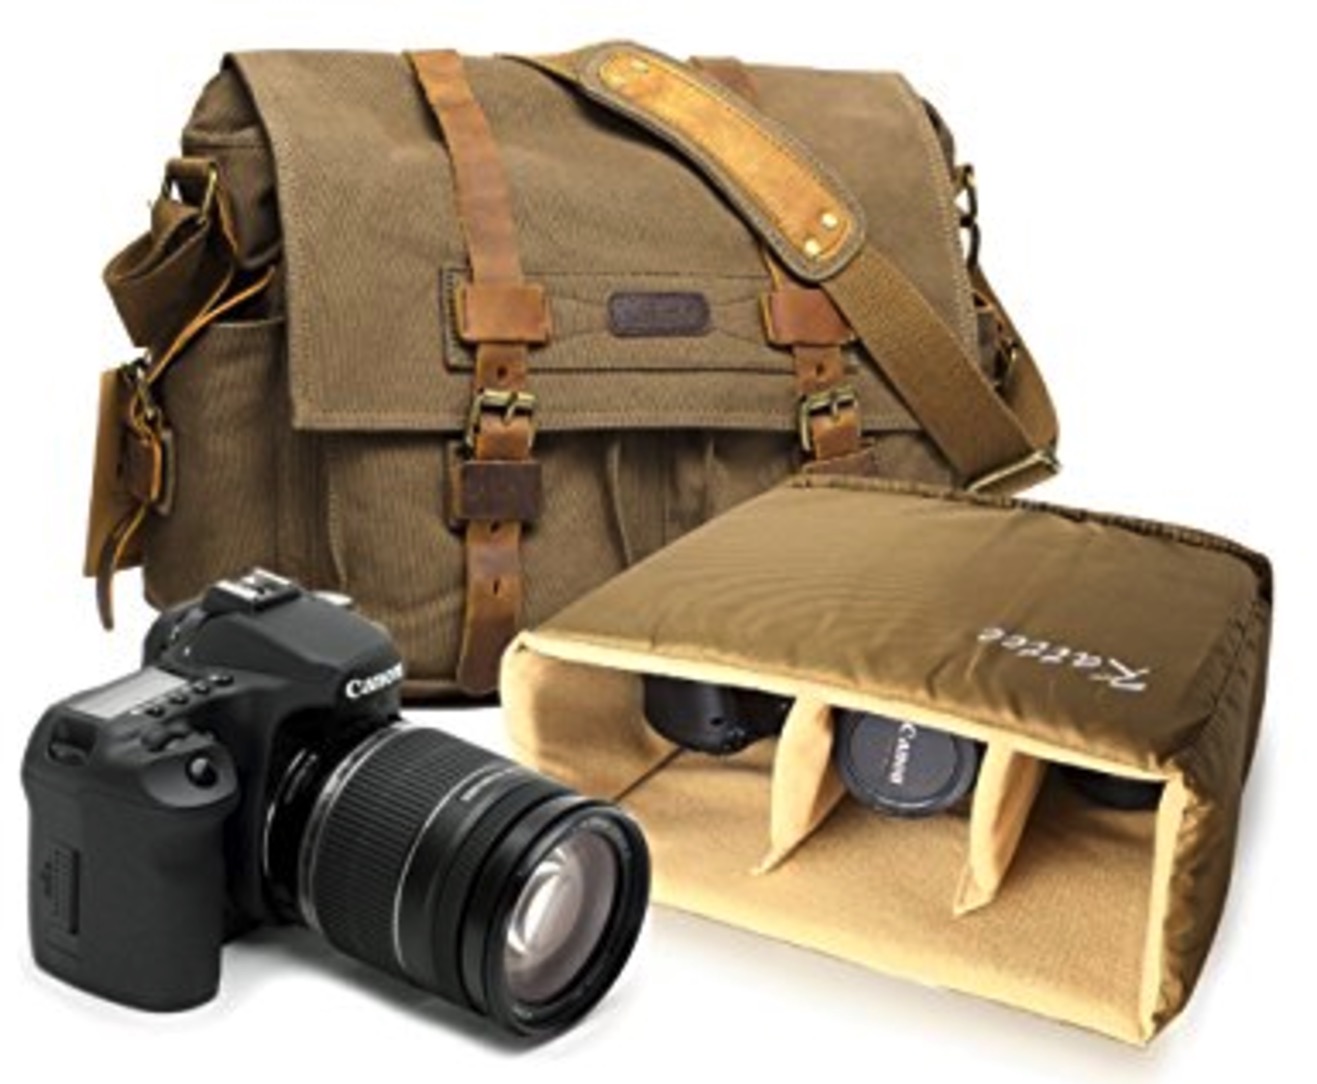 Kattee Canvas Leather Bag, best leather camera bags, leather bags for camera, leather camera backpack